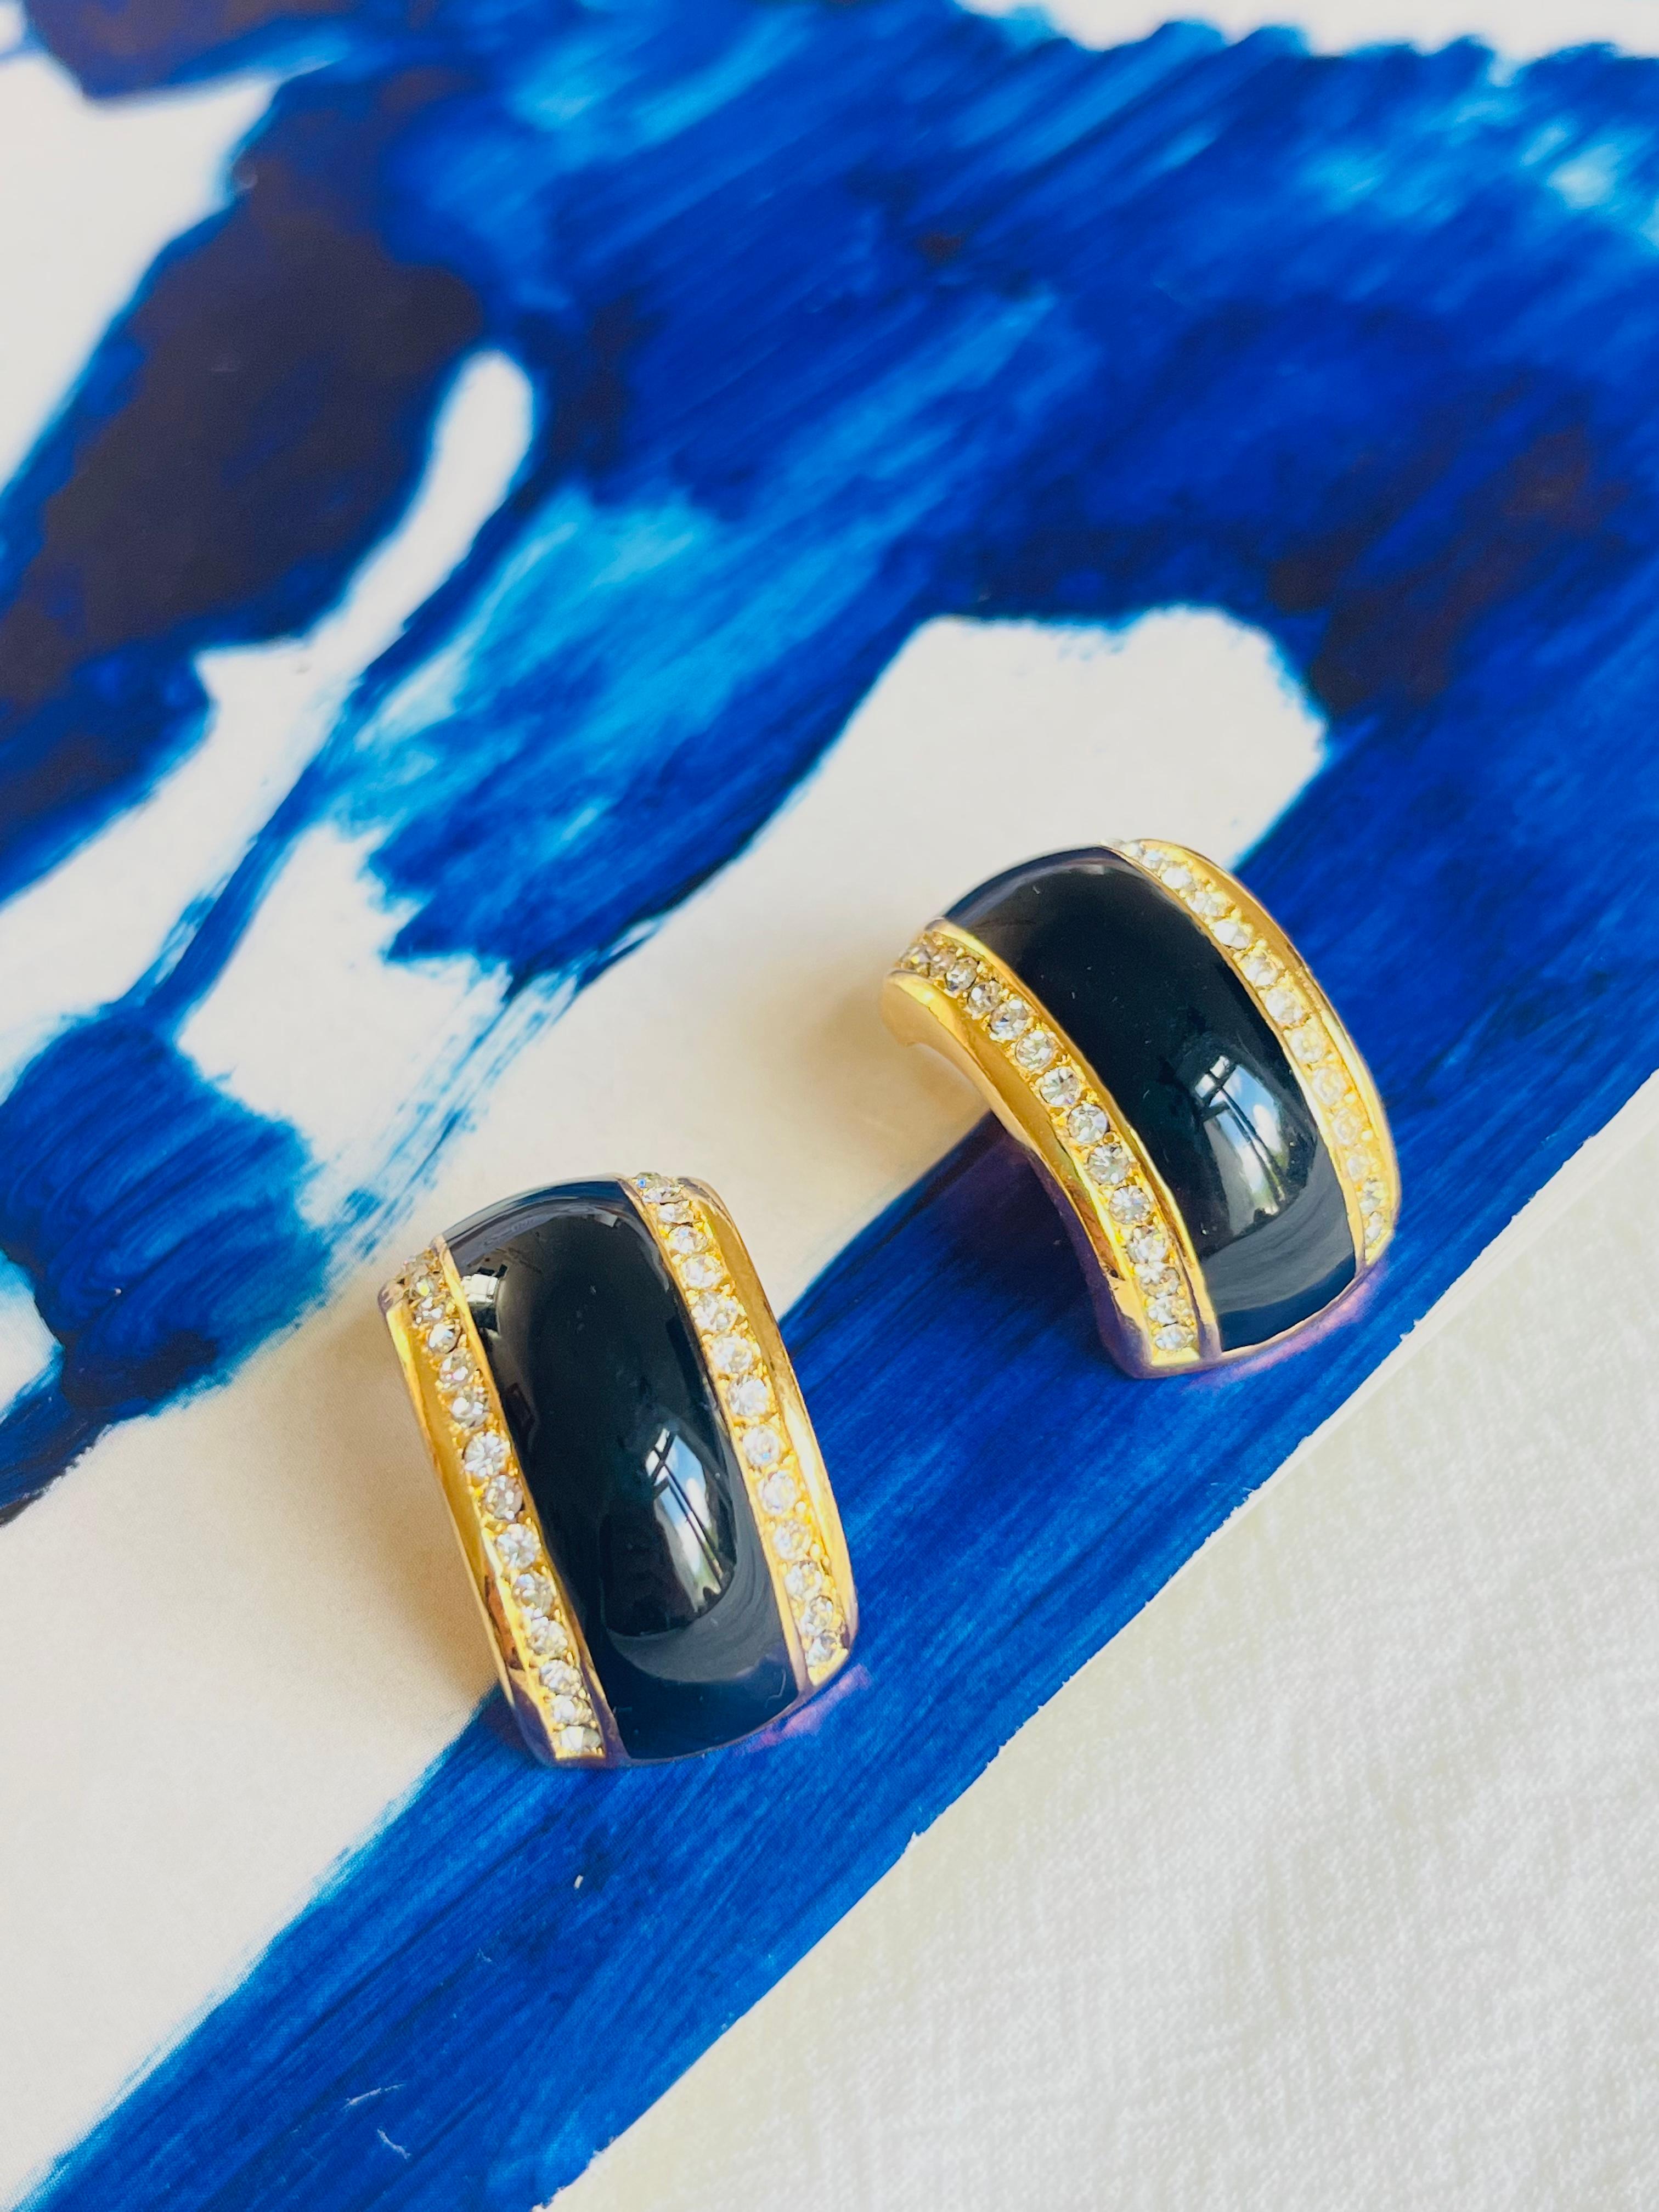 Christian Dior Vintage 1980s Large Black Enamel Double Crystals Dome Hoop Clip Earrings, Gold Tone

Very excellent condition. Very new. 100% genuine. 

A very beautiful pair of clip on earrings by Chr. DIOR, signed at the back.

Size: 2.8*1.8